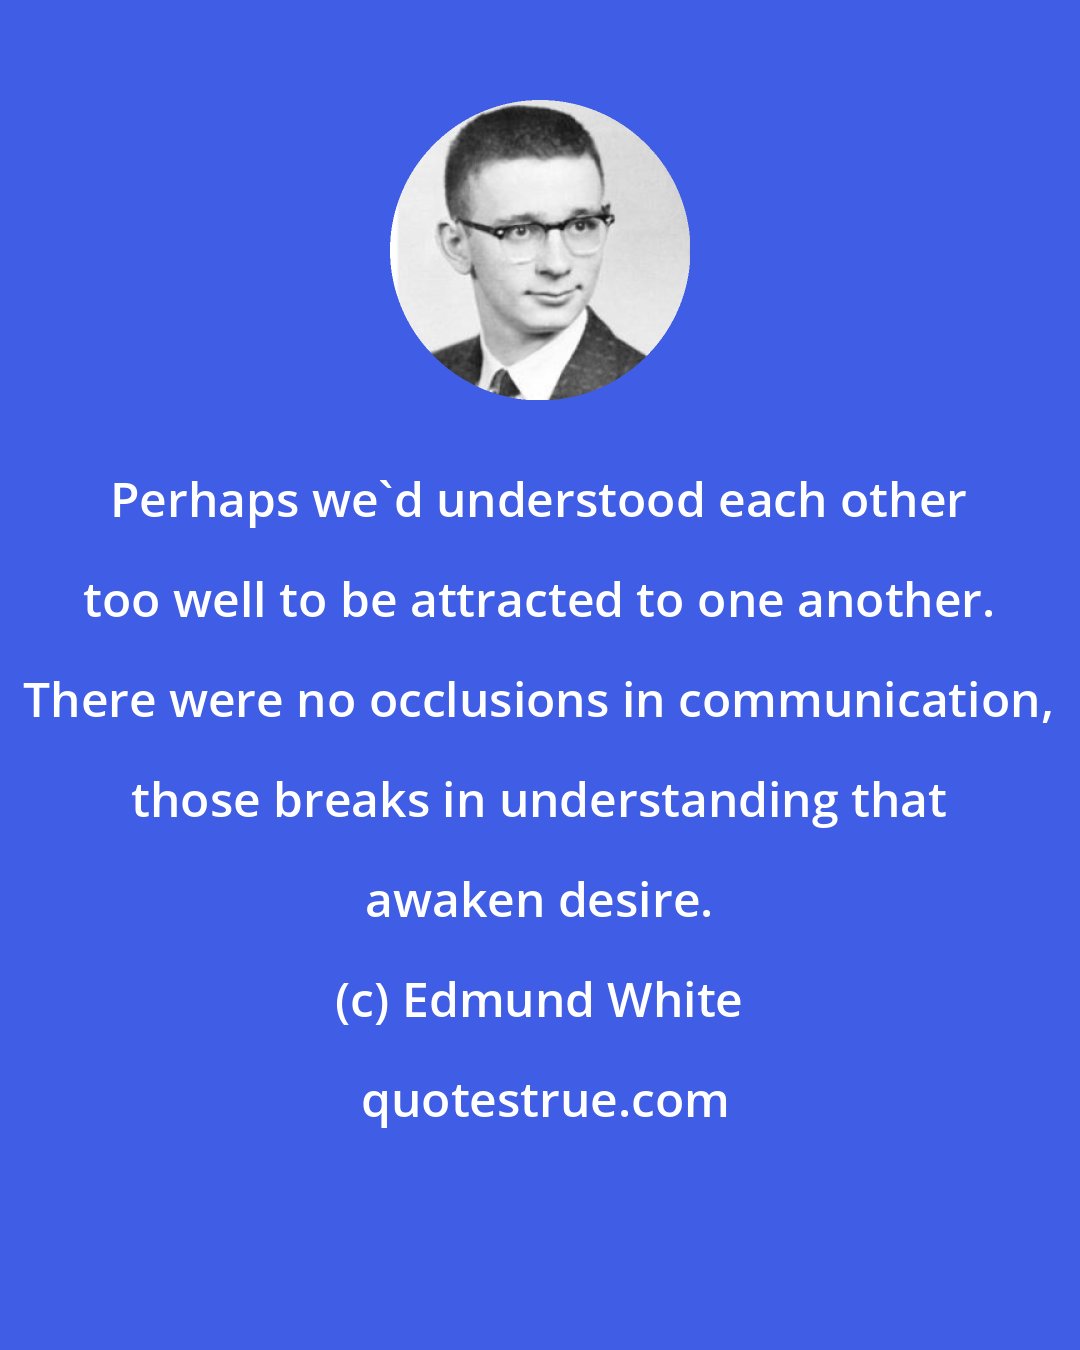 Edmund White: Perhaps we'd understood each other too well to be attracted to one another. There were no occlusions in communication, those breaks in understanding that awaken desire.